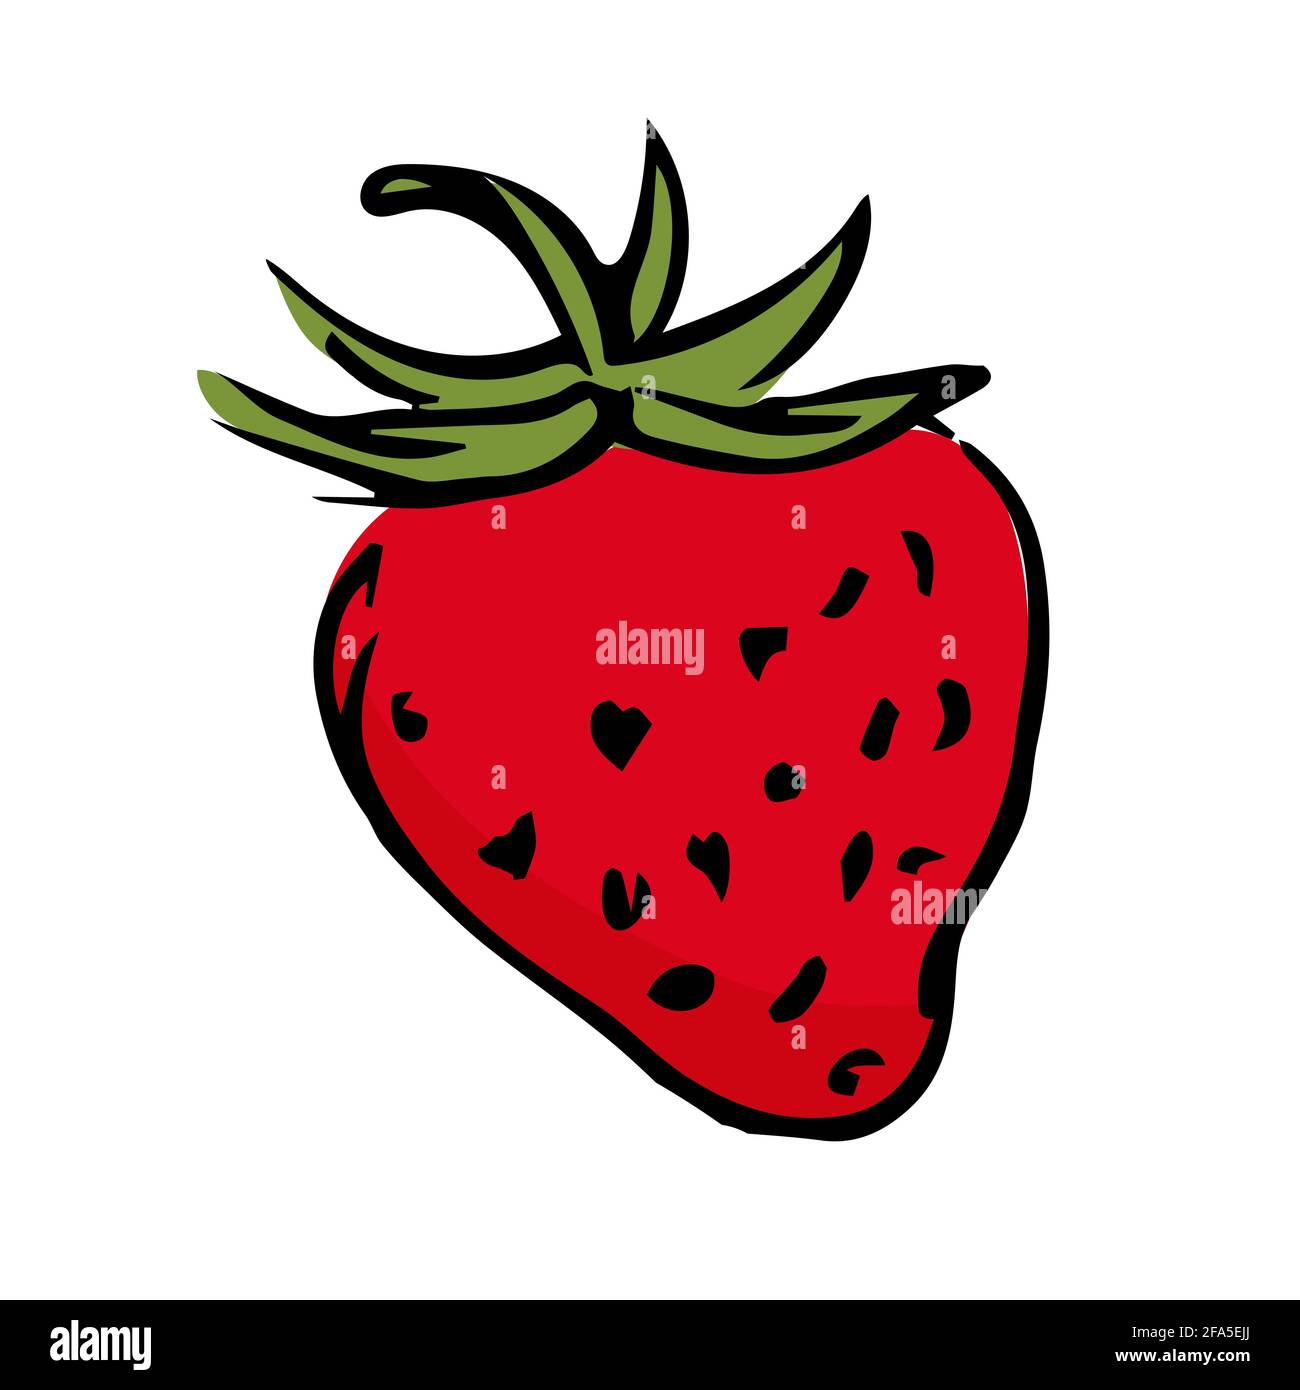 Hand drawn stawberry illustration isolated on white background. Stock Vector